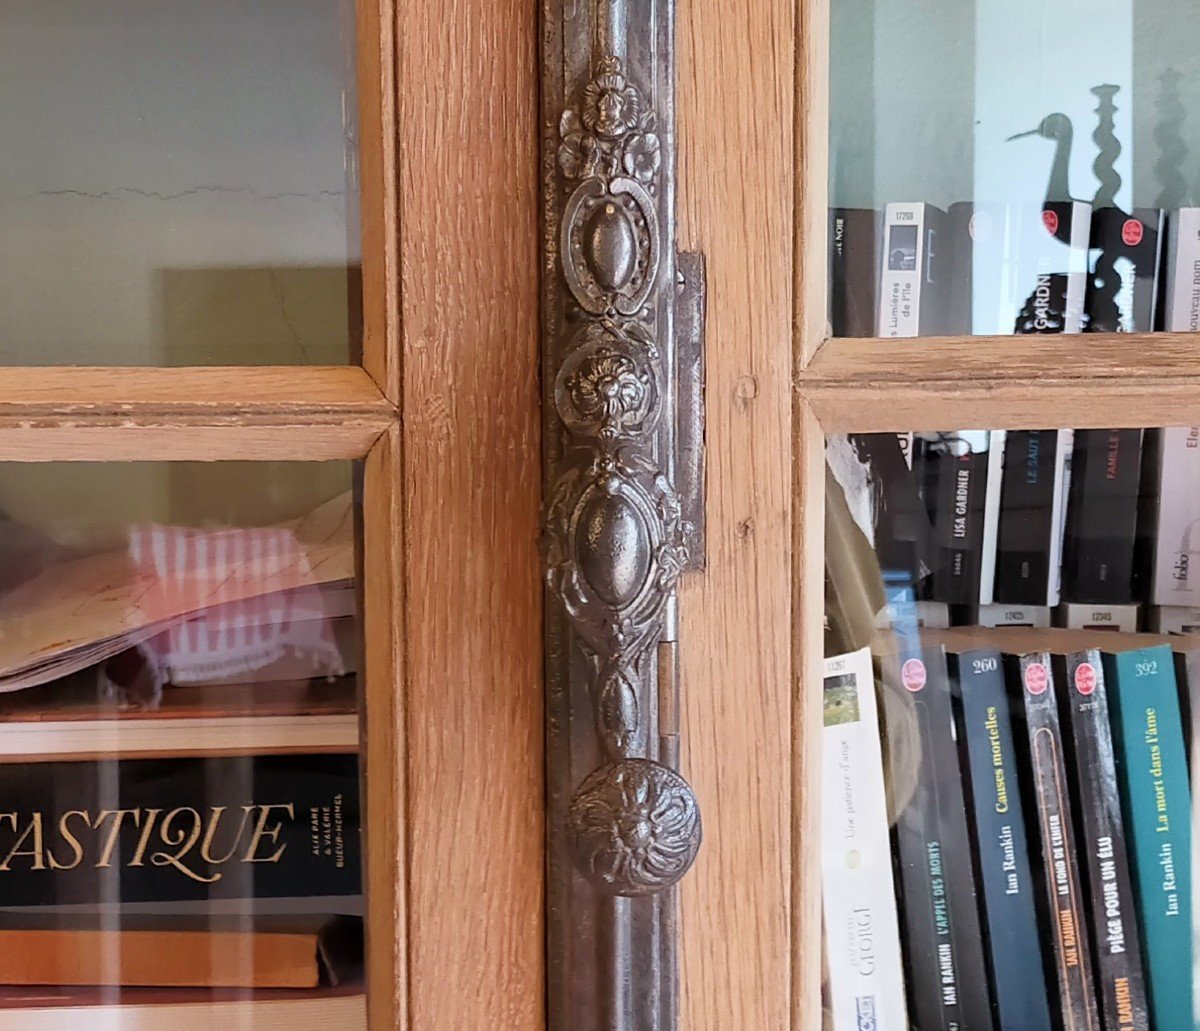 Large Old 19th Century Castle Window And Its Handle For Showcase Library Door Furniture